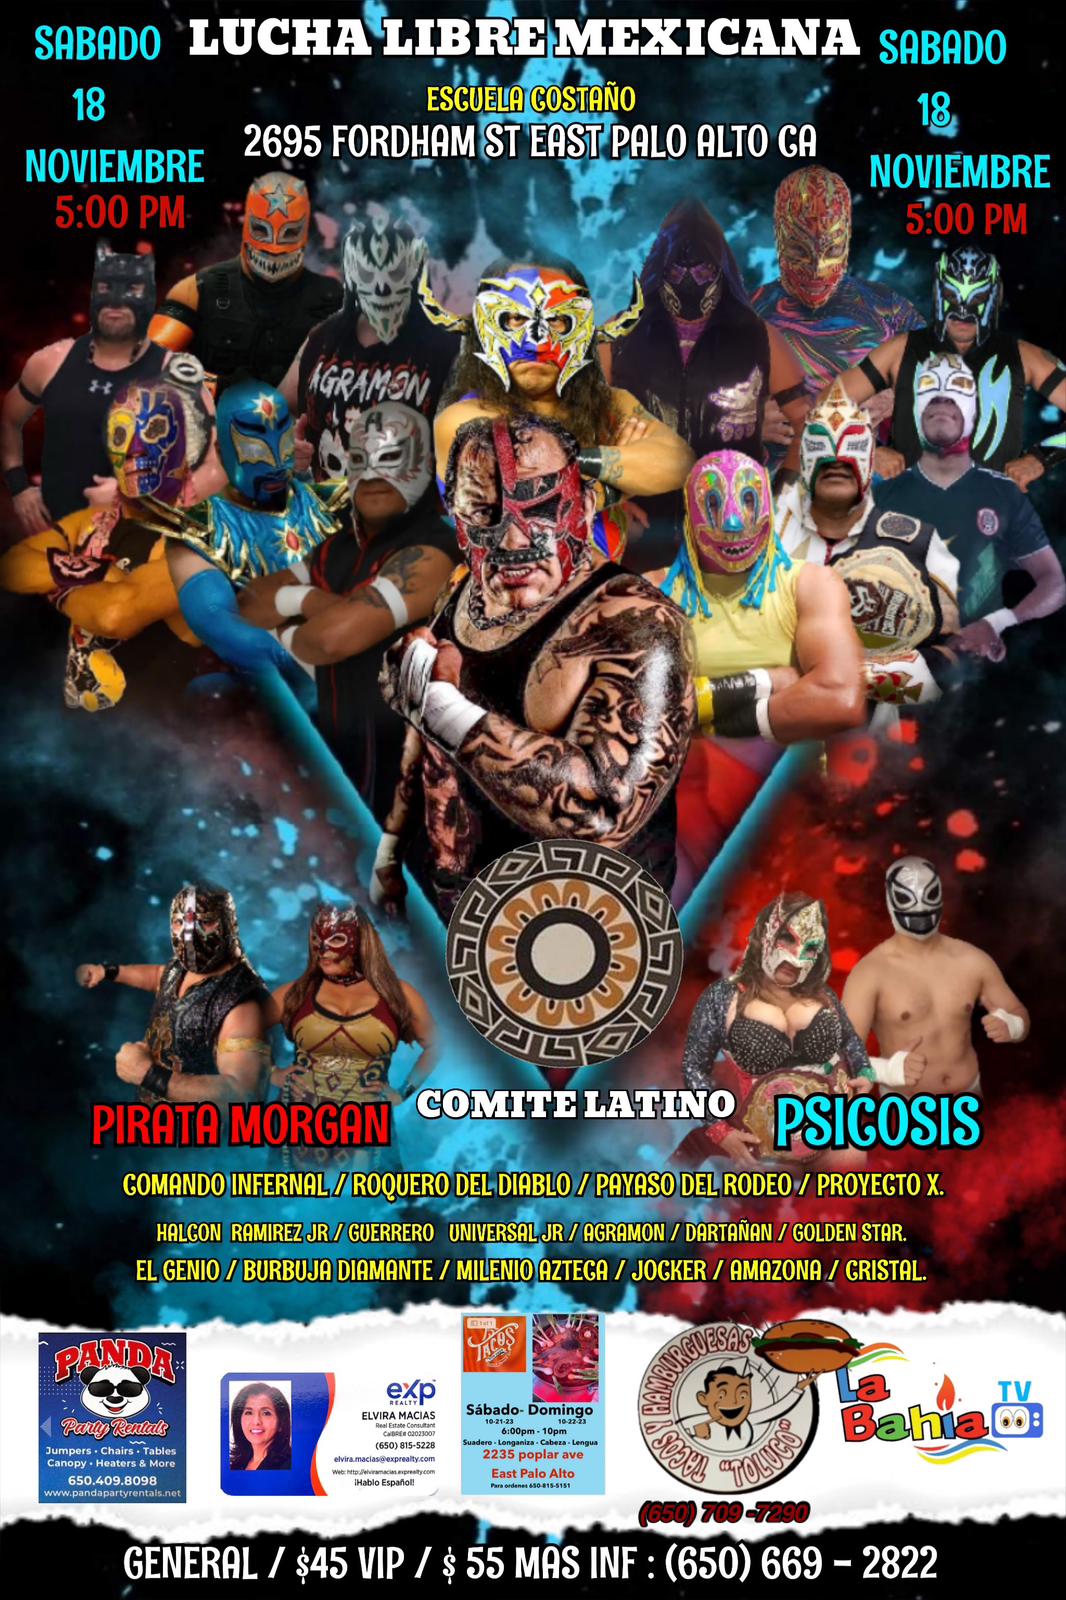 East Palo Alto Latino Community prepares for its first Mexican wrestling event in East Palo Alto